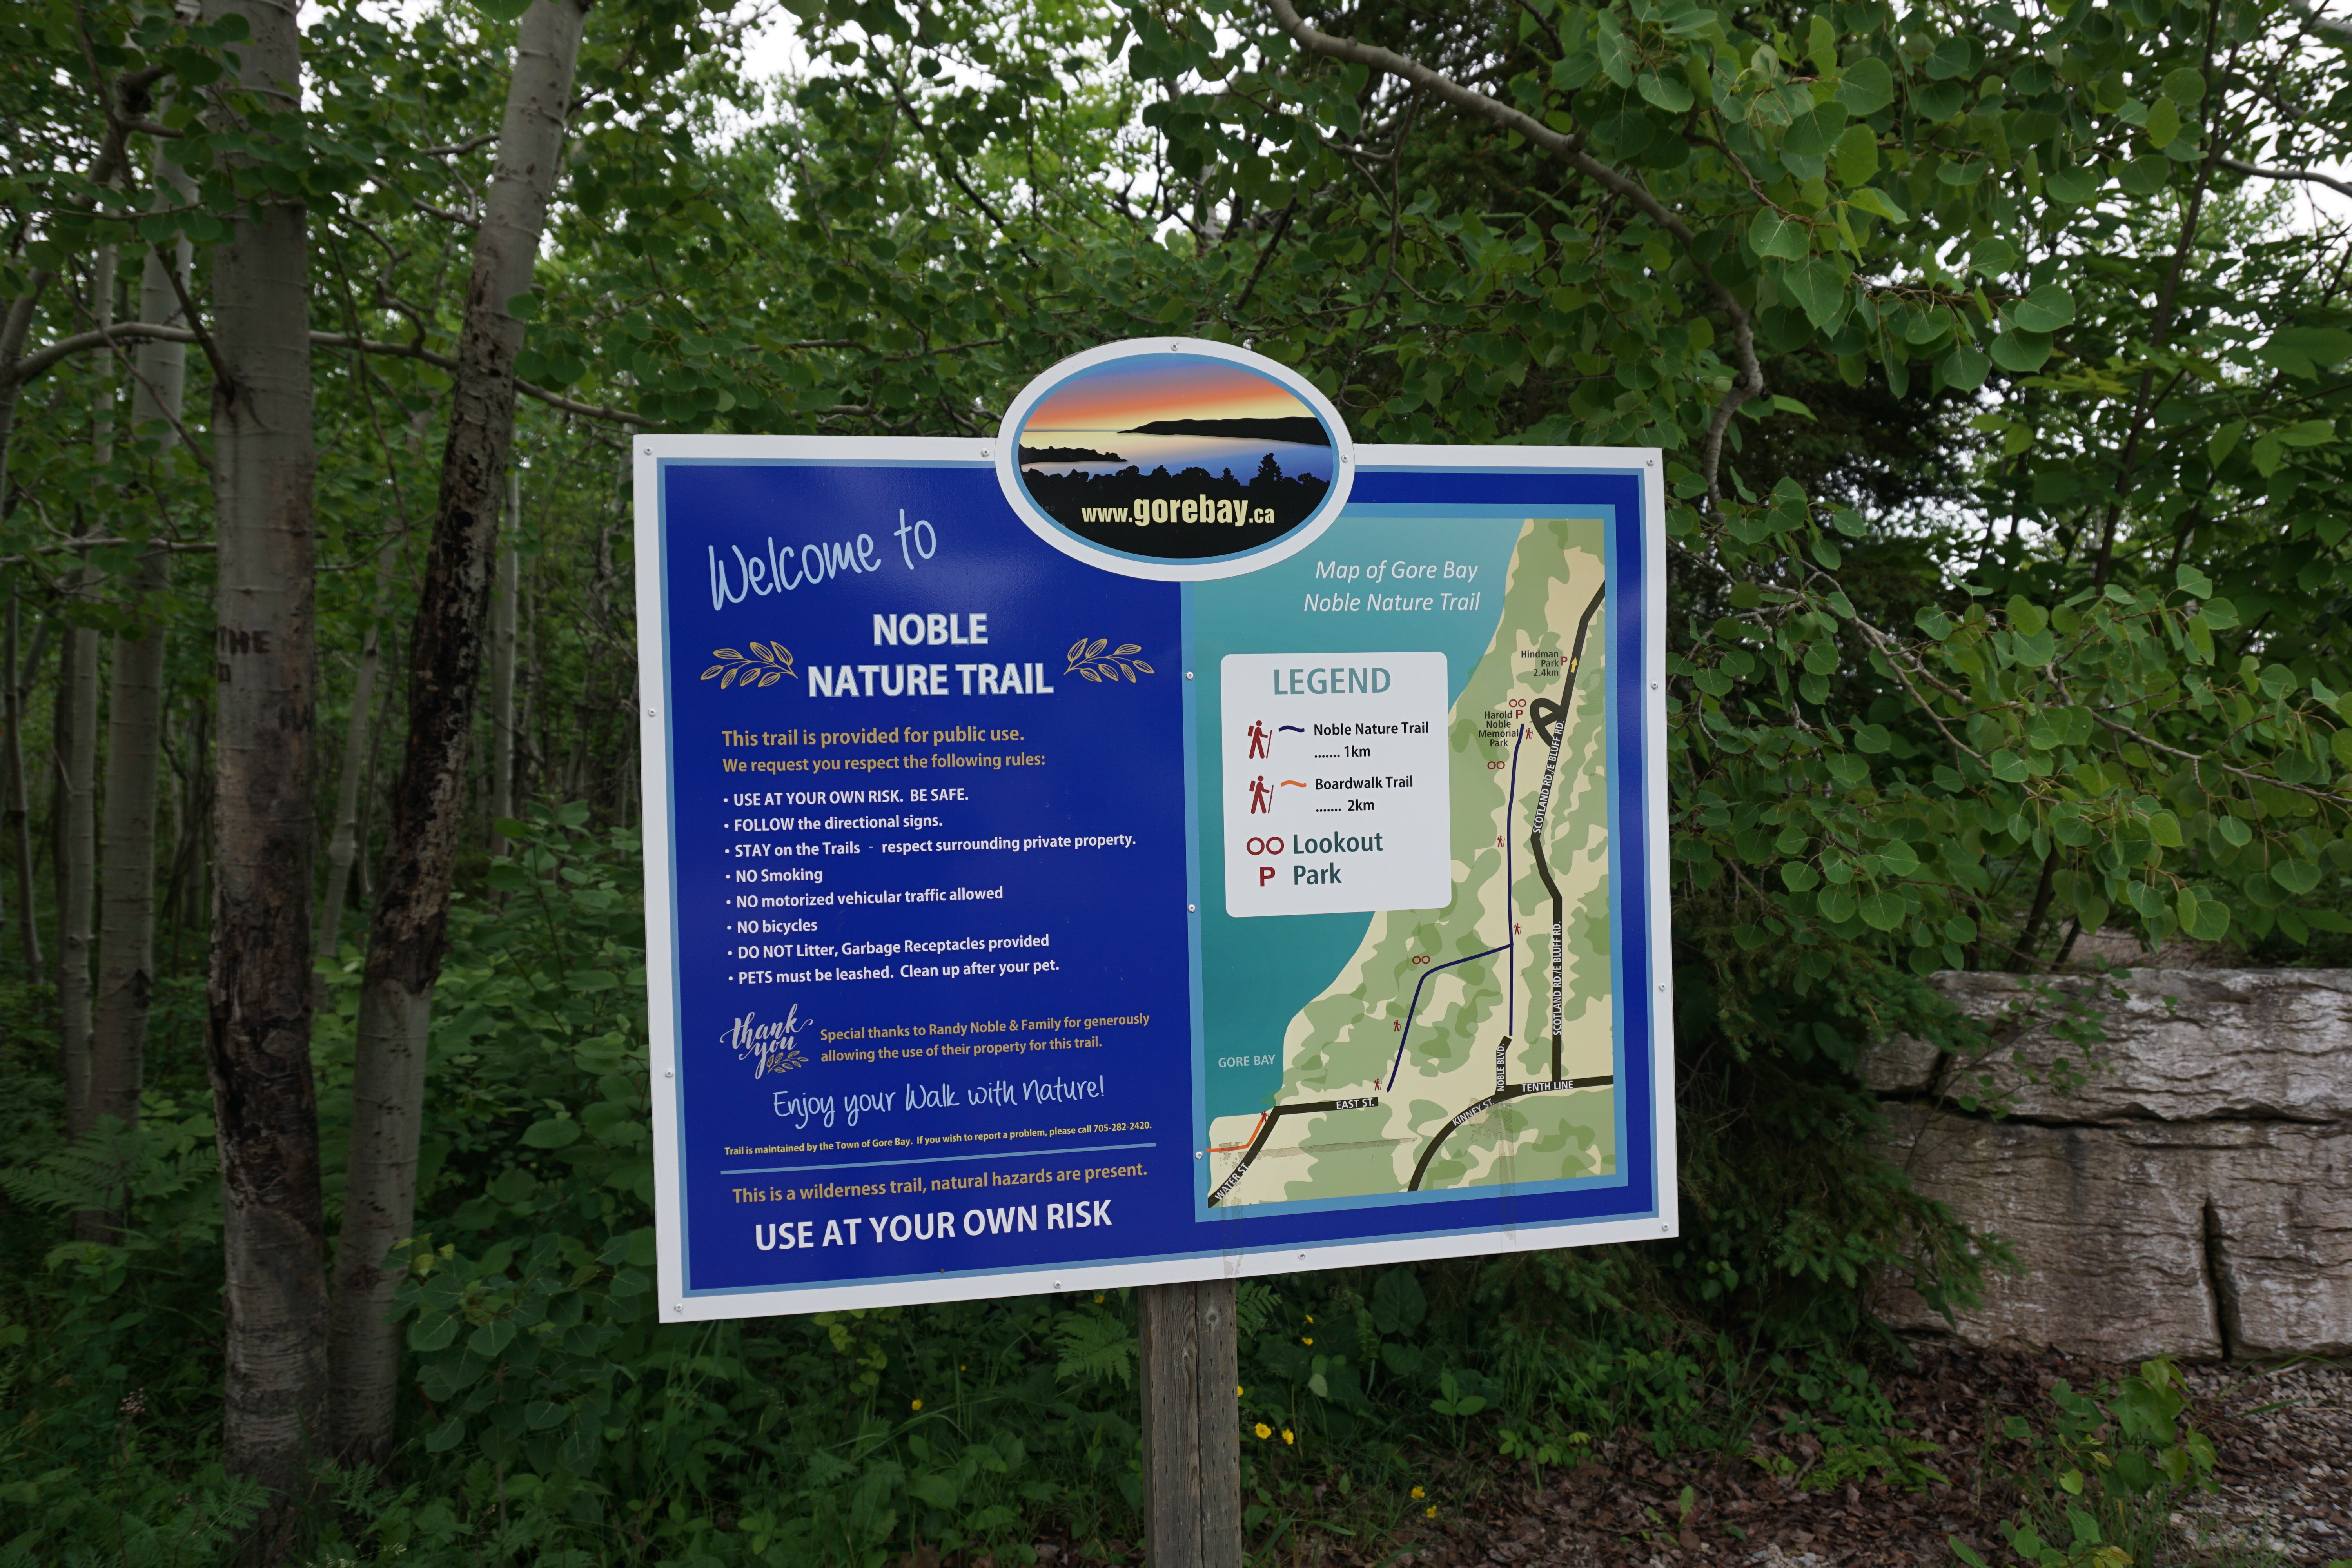 a blue park informational sign for" The Noble Nature Trail" near Gore Bay, with lush green trees in the background.